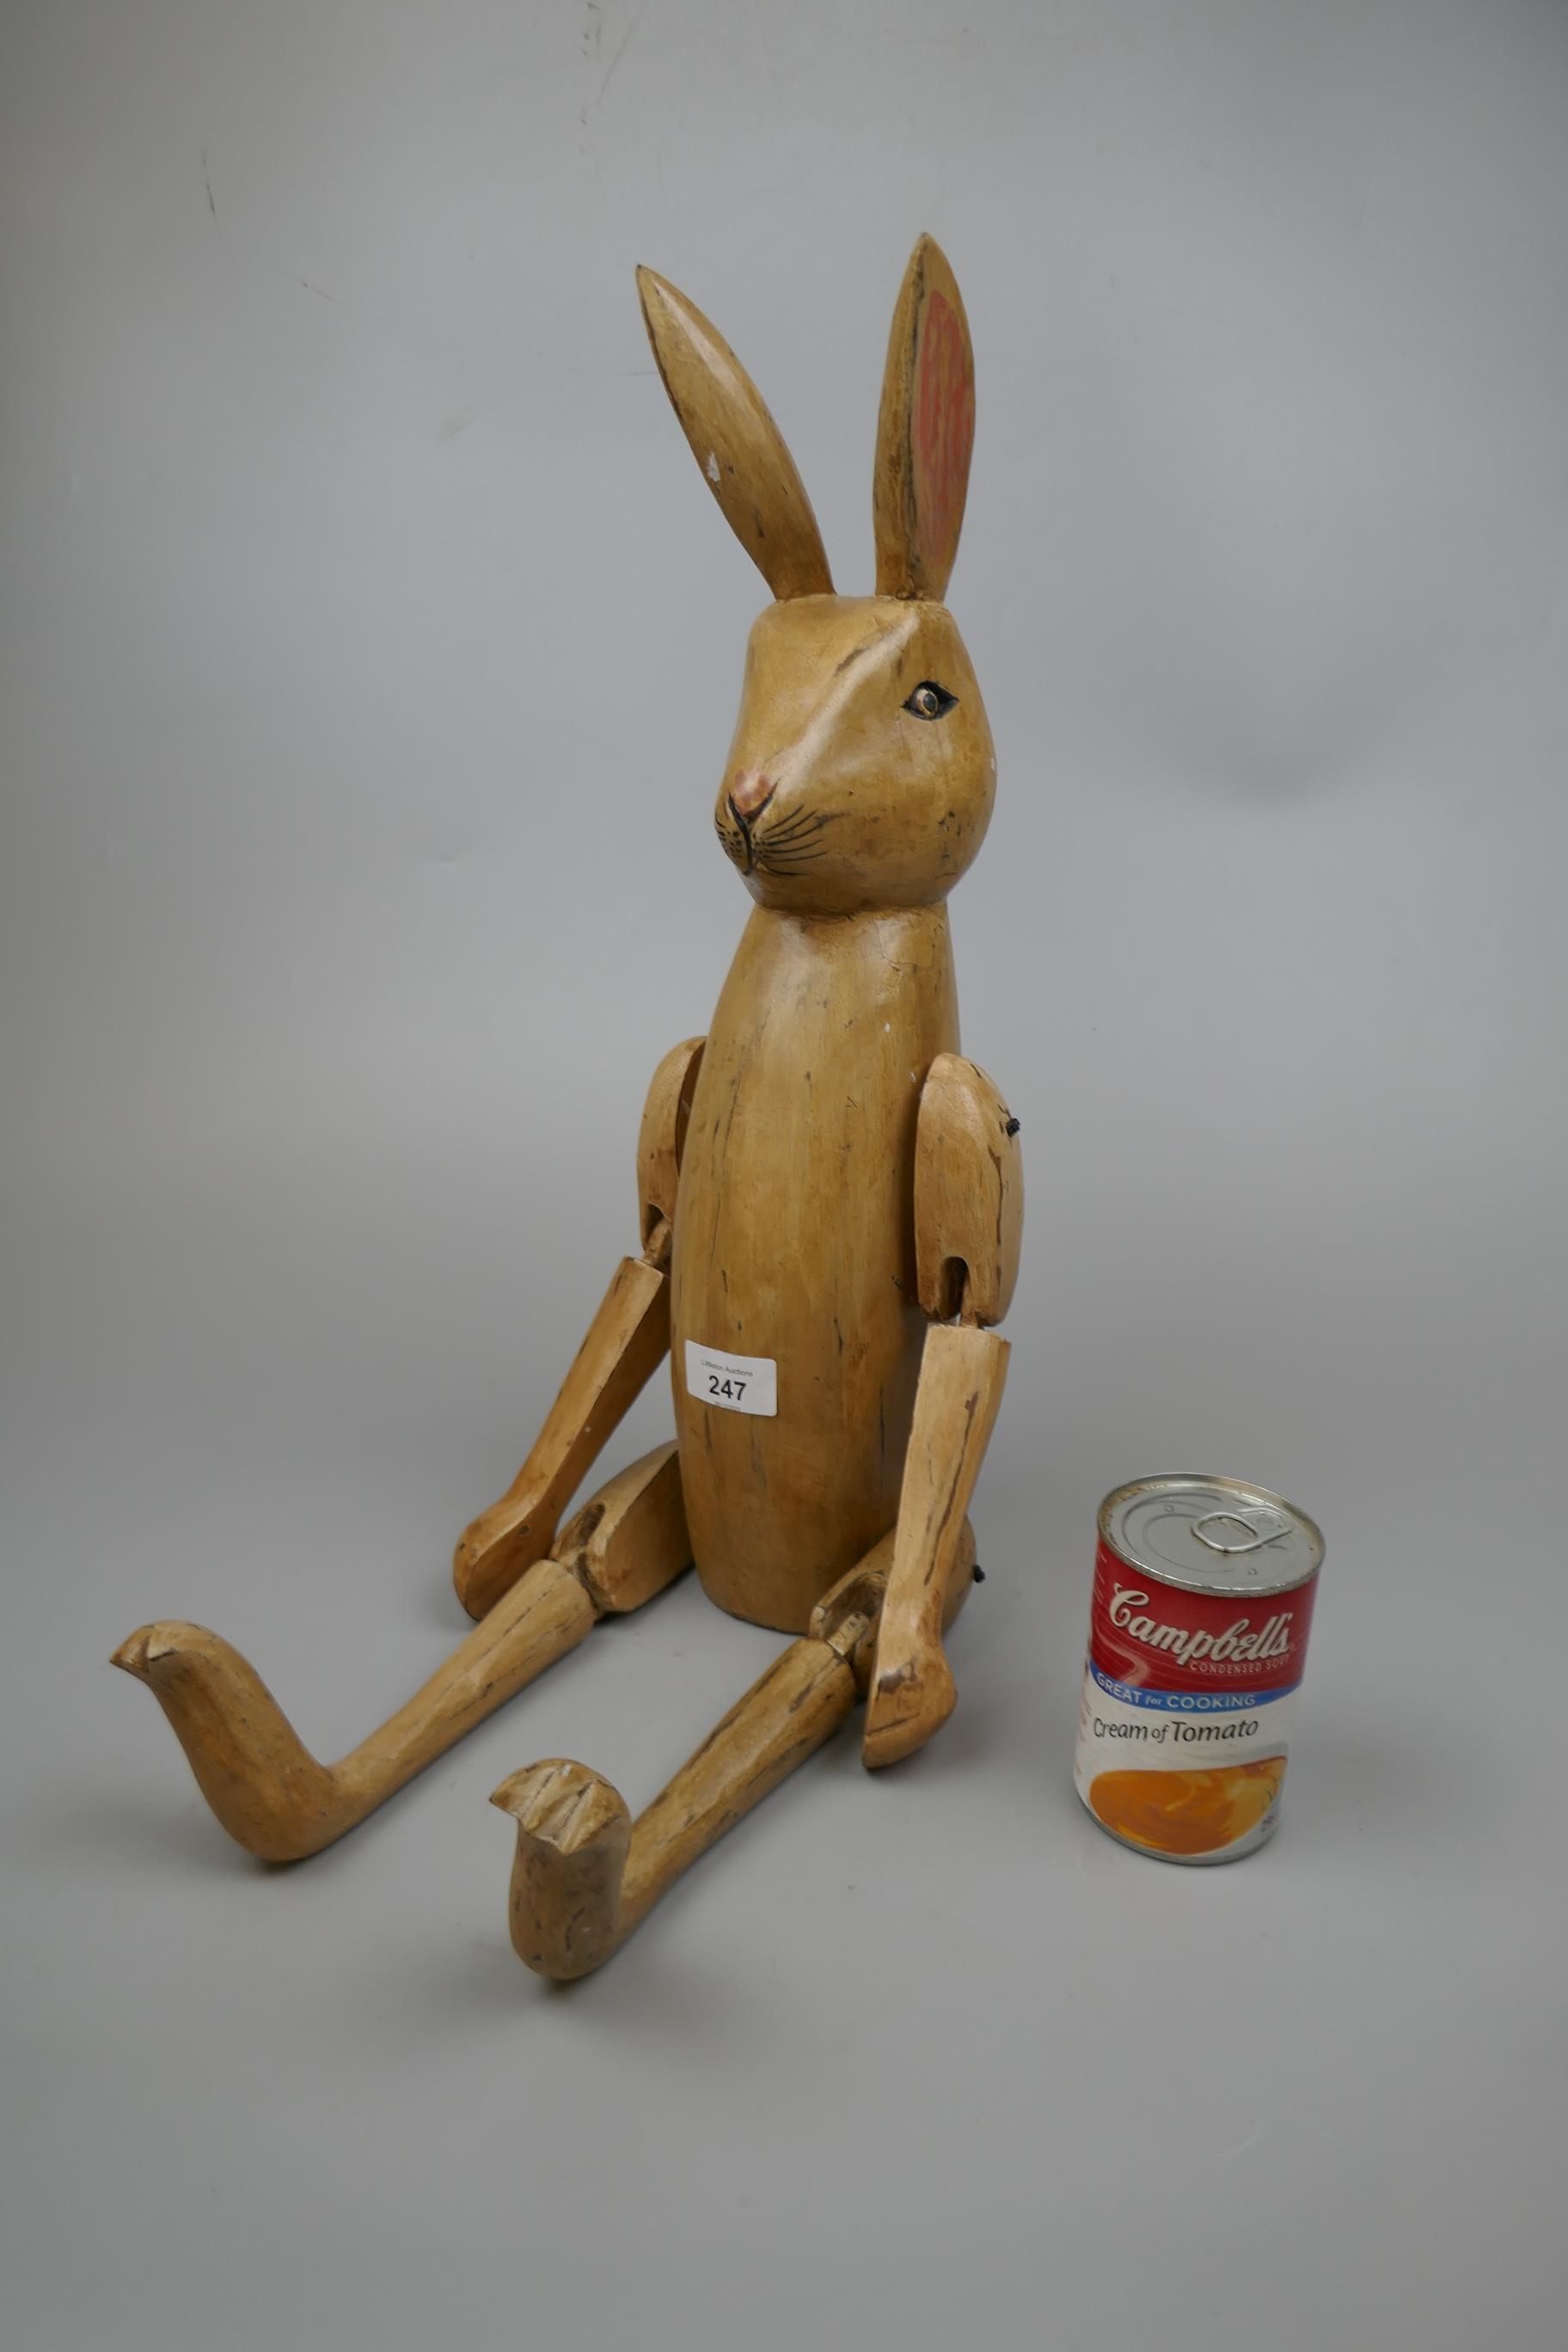 Articulated wooden rabbit figure - Image 2 of 2